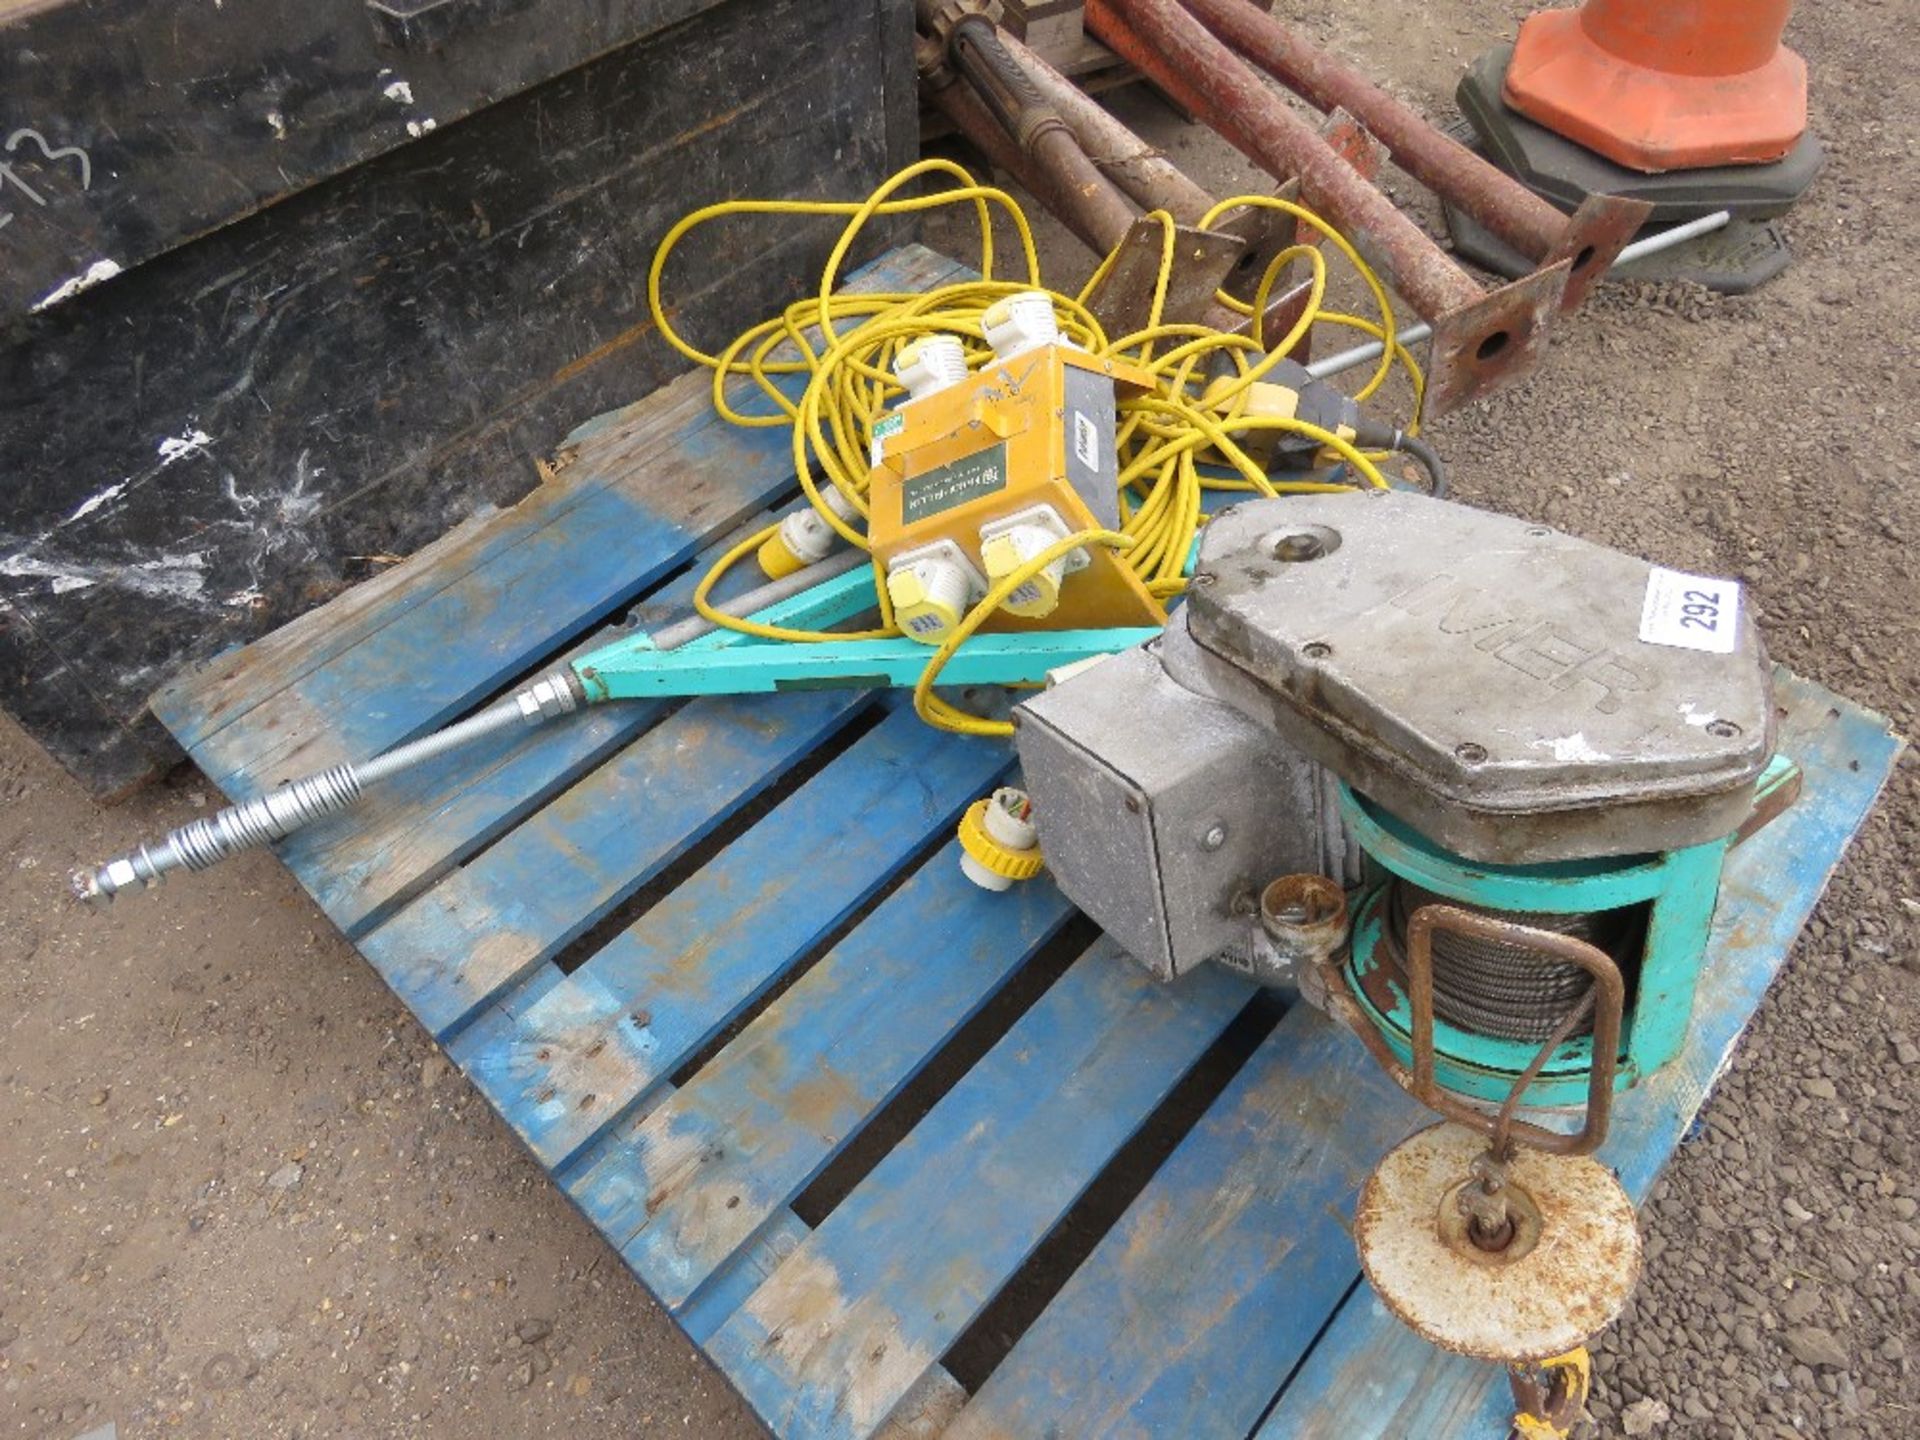 IMER SCAFFOLD HOIST UNIT WITH 110VOLT JUNCTION BOX AND EXTENSION LEAD , SOURCED FROM DEPOT CLOSURE. - Image 2 of 5